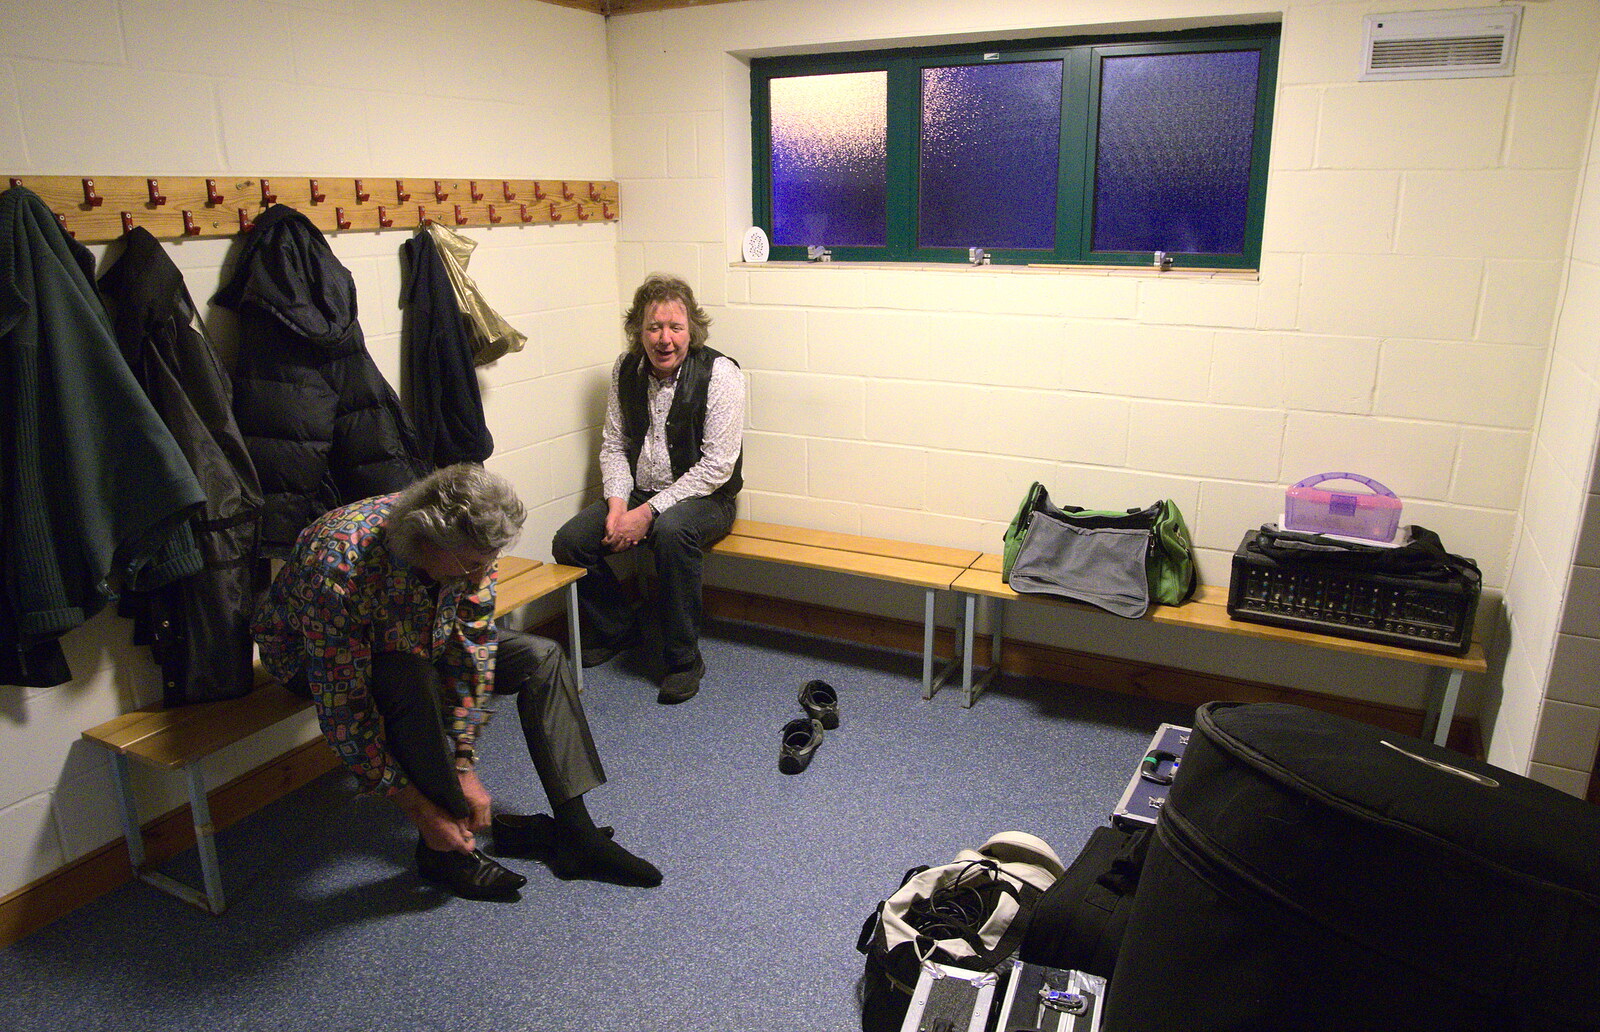 The BBs at the Mayor's Charity Ball, Town Moors, Eye, Suffolk - 4th May 2013: Rob and Max in the 'Green Room' (the changing rooms)